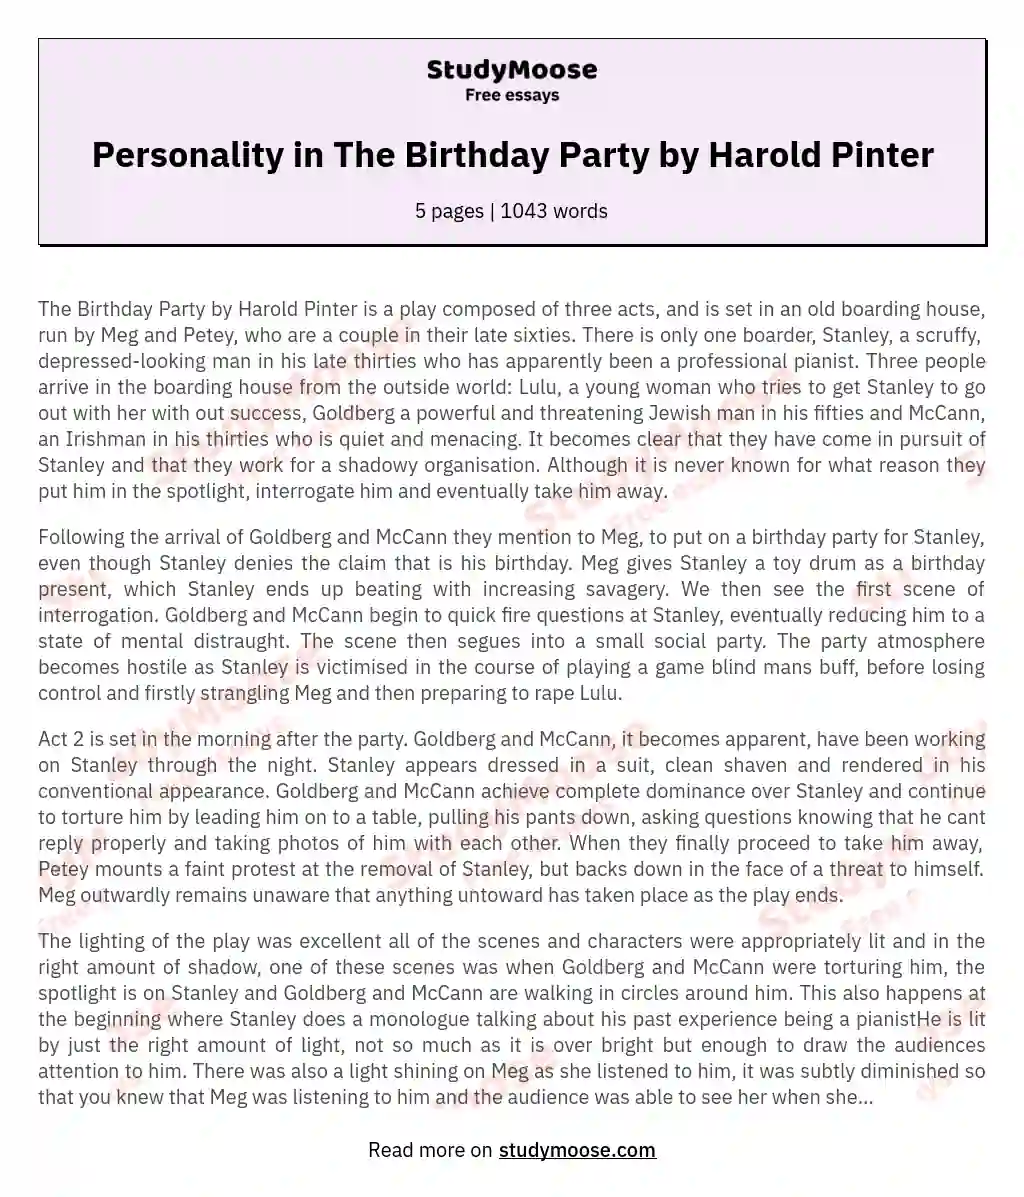 Personality in The Birthday Party by Harold Pinter